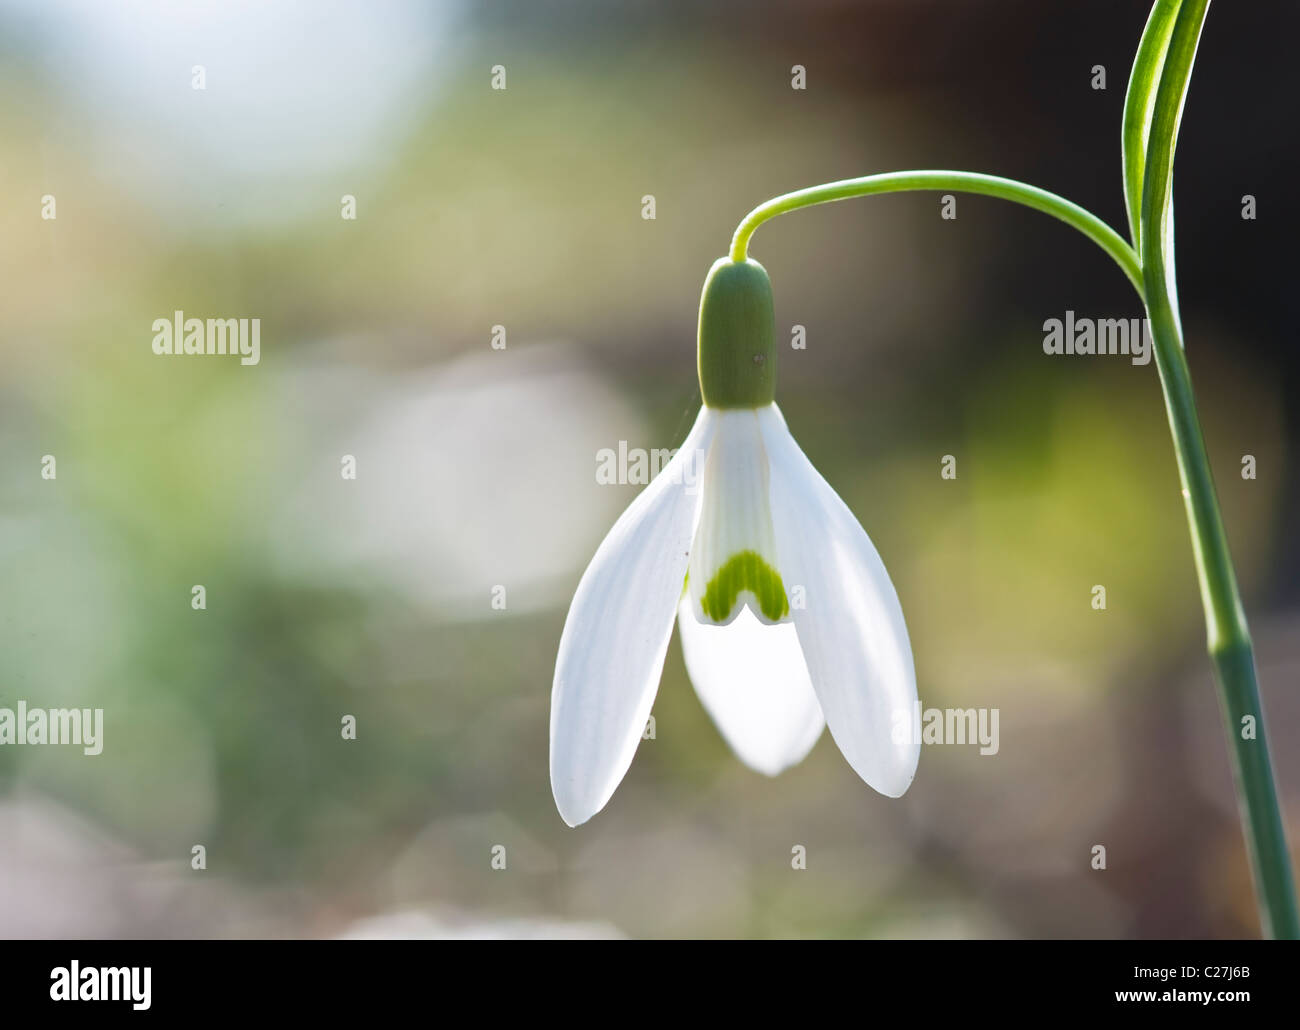 Fresh Spring snowdrop flowers with shallow depth of field and blurred bokeh background Stock Photo